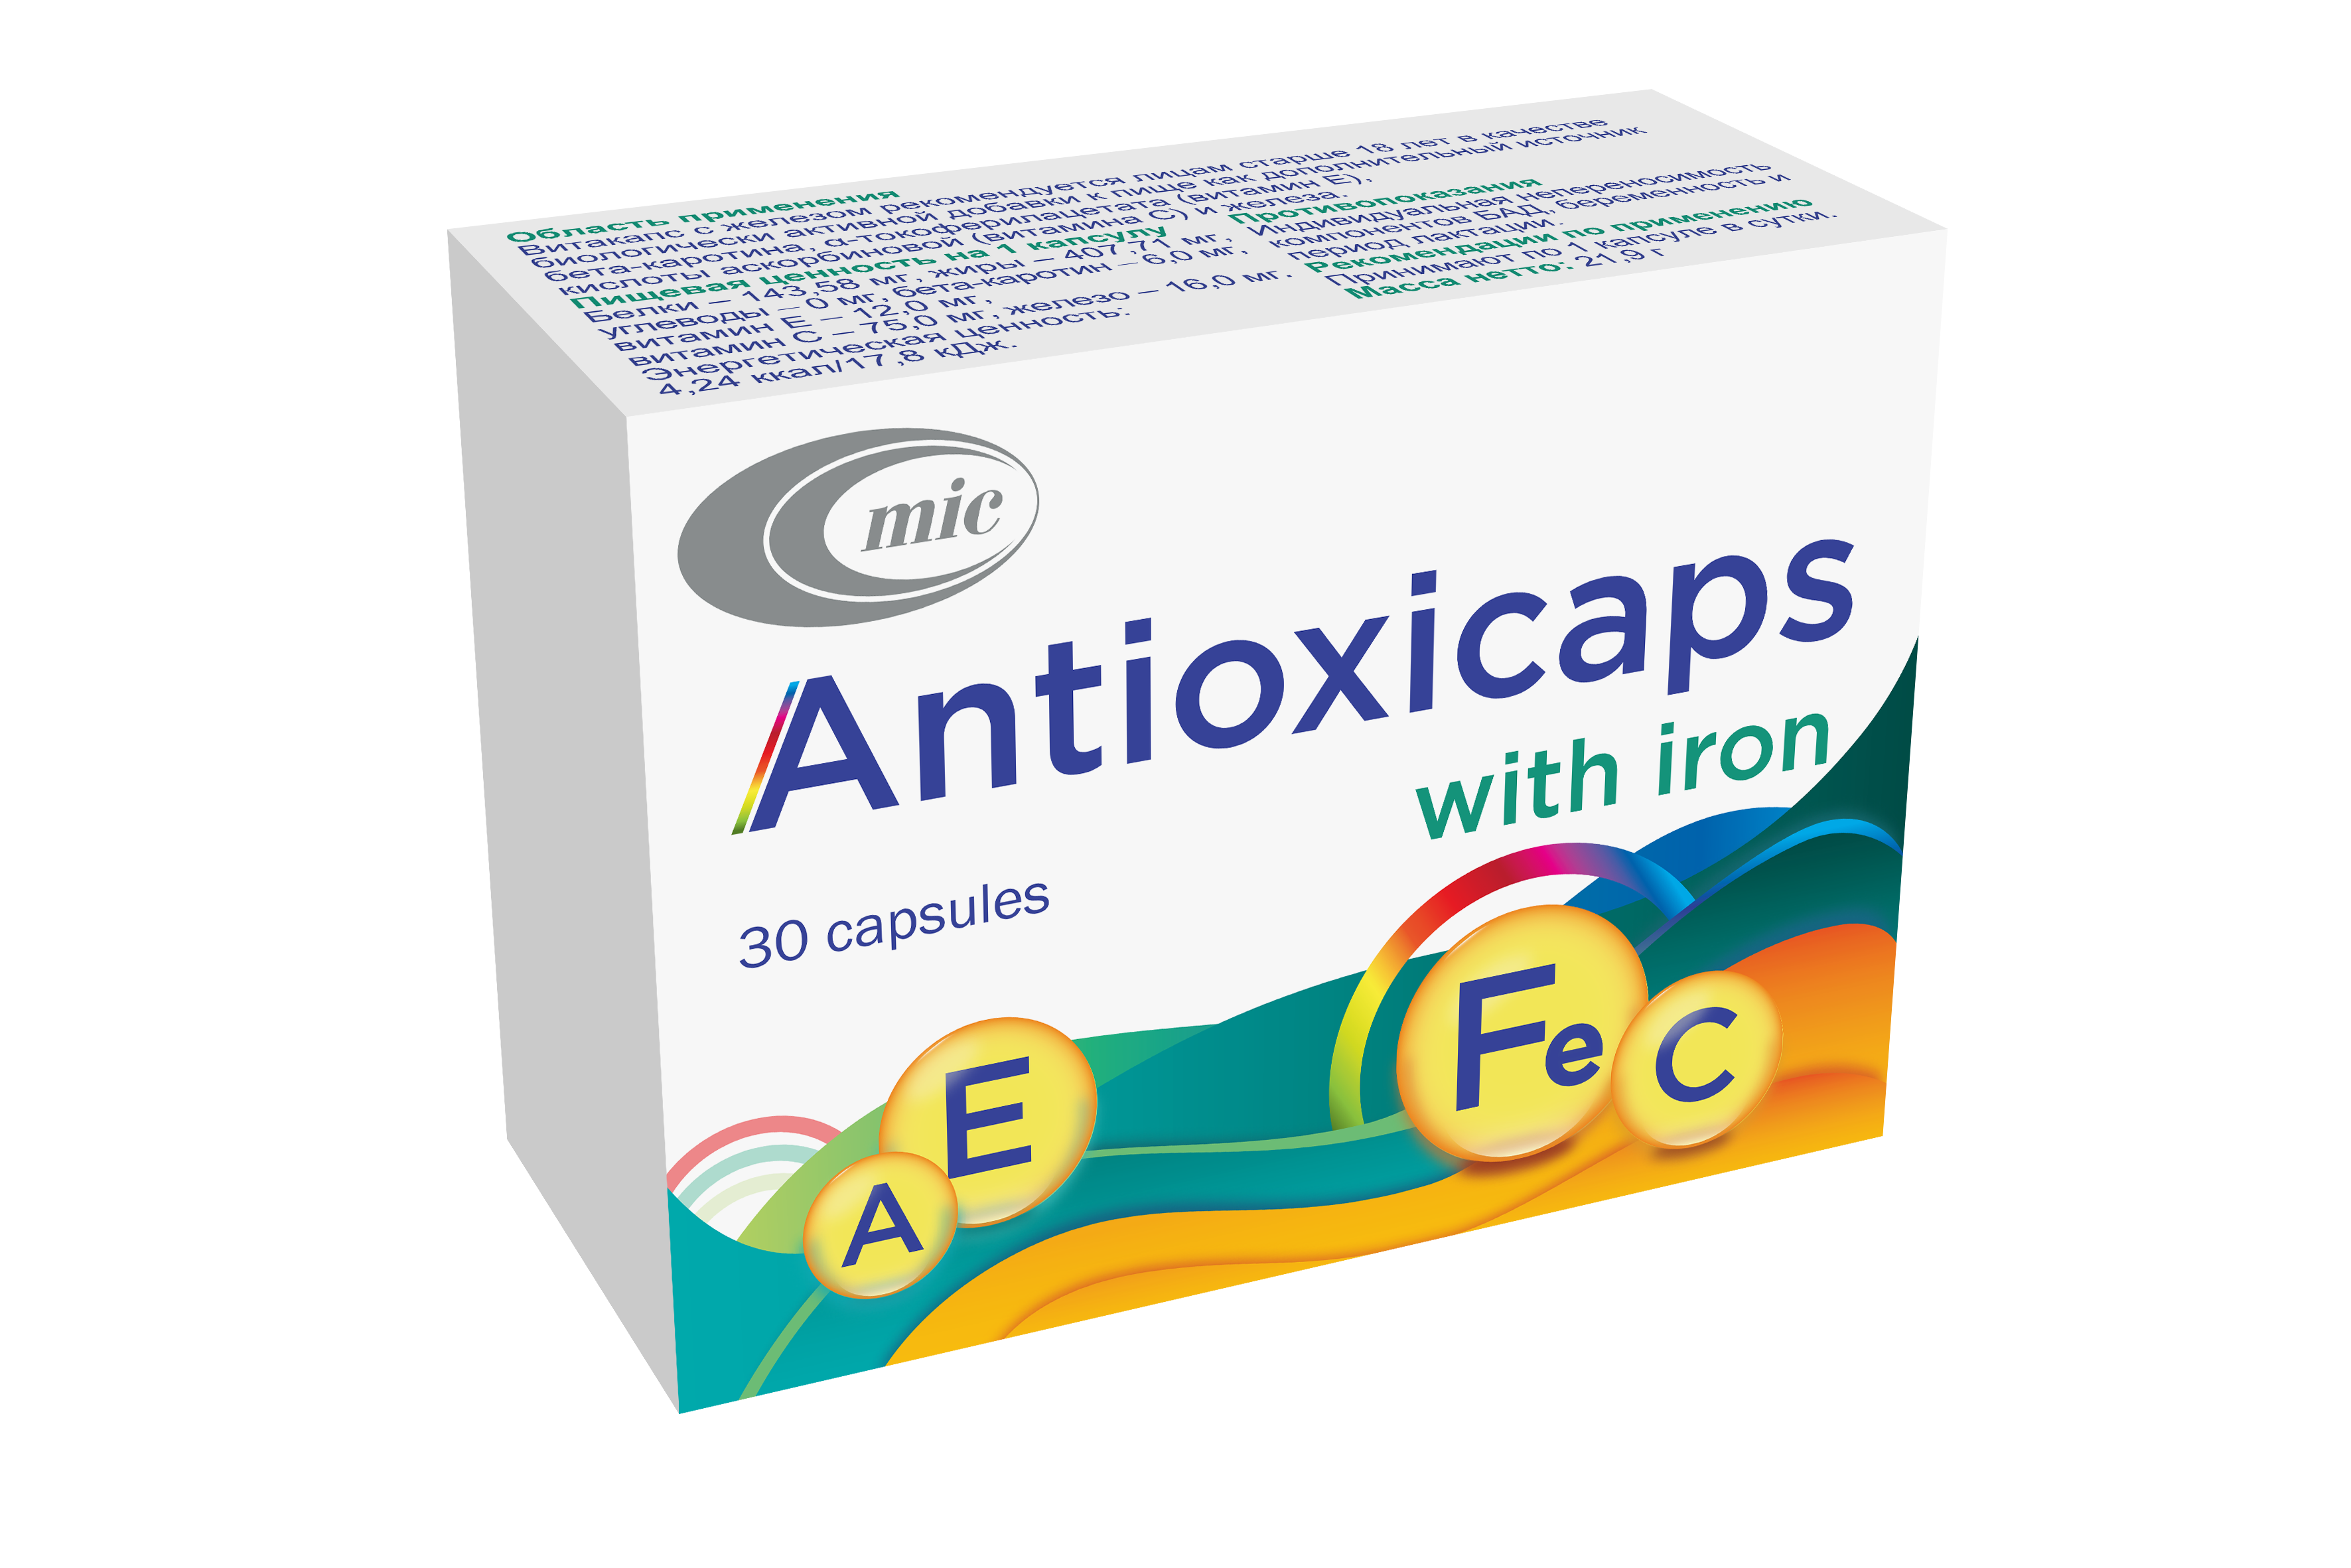 Antioxicaps with Iron is back on sale!